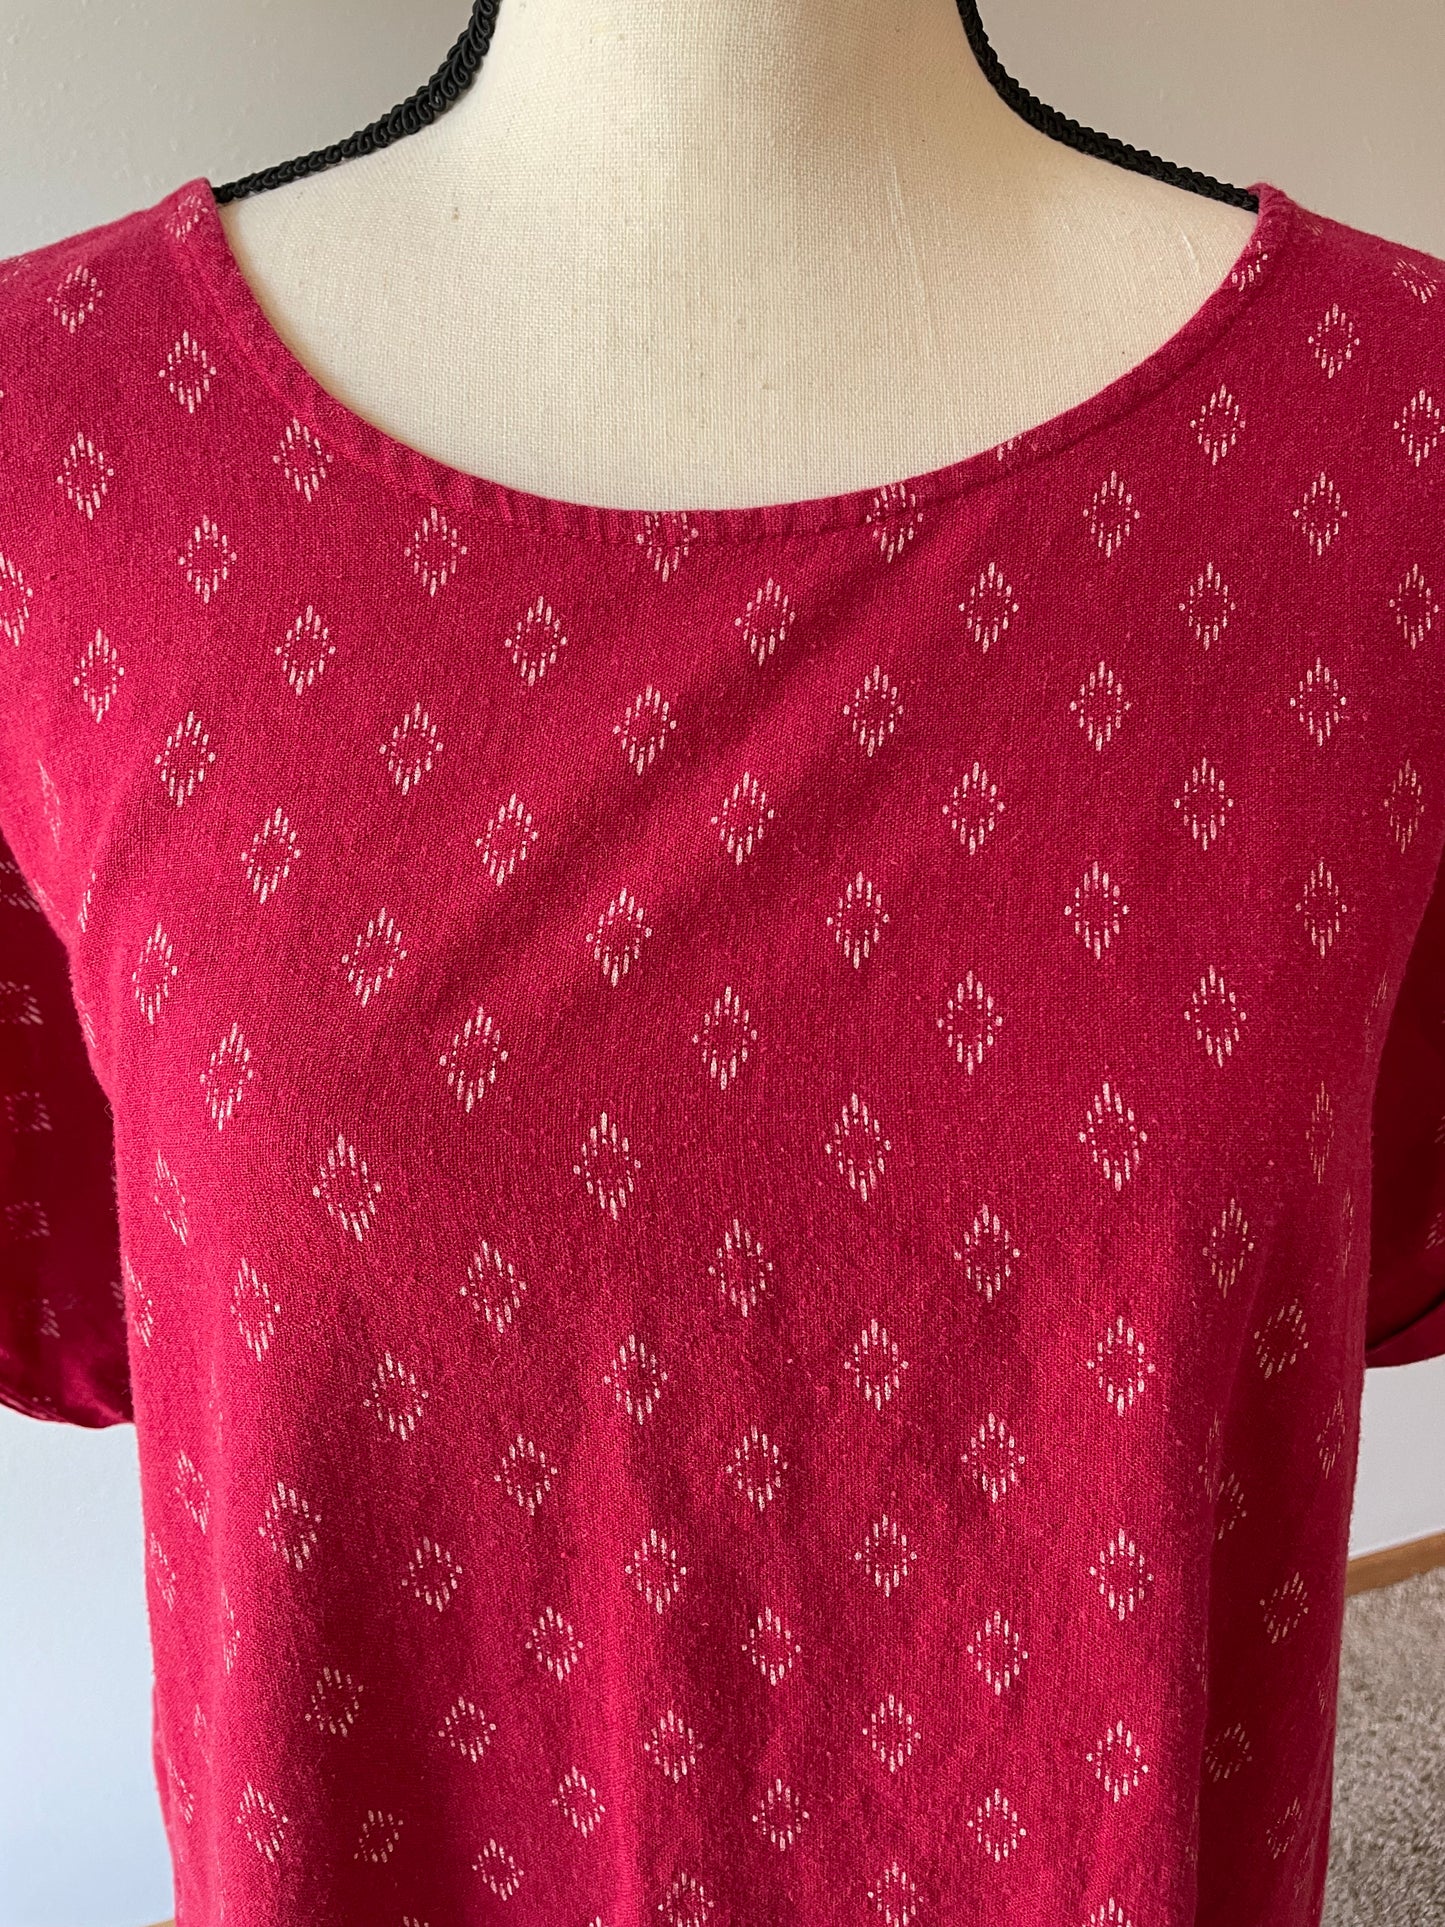 Old Navy Red Shift Dress (XL)